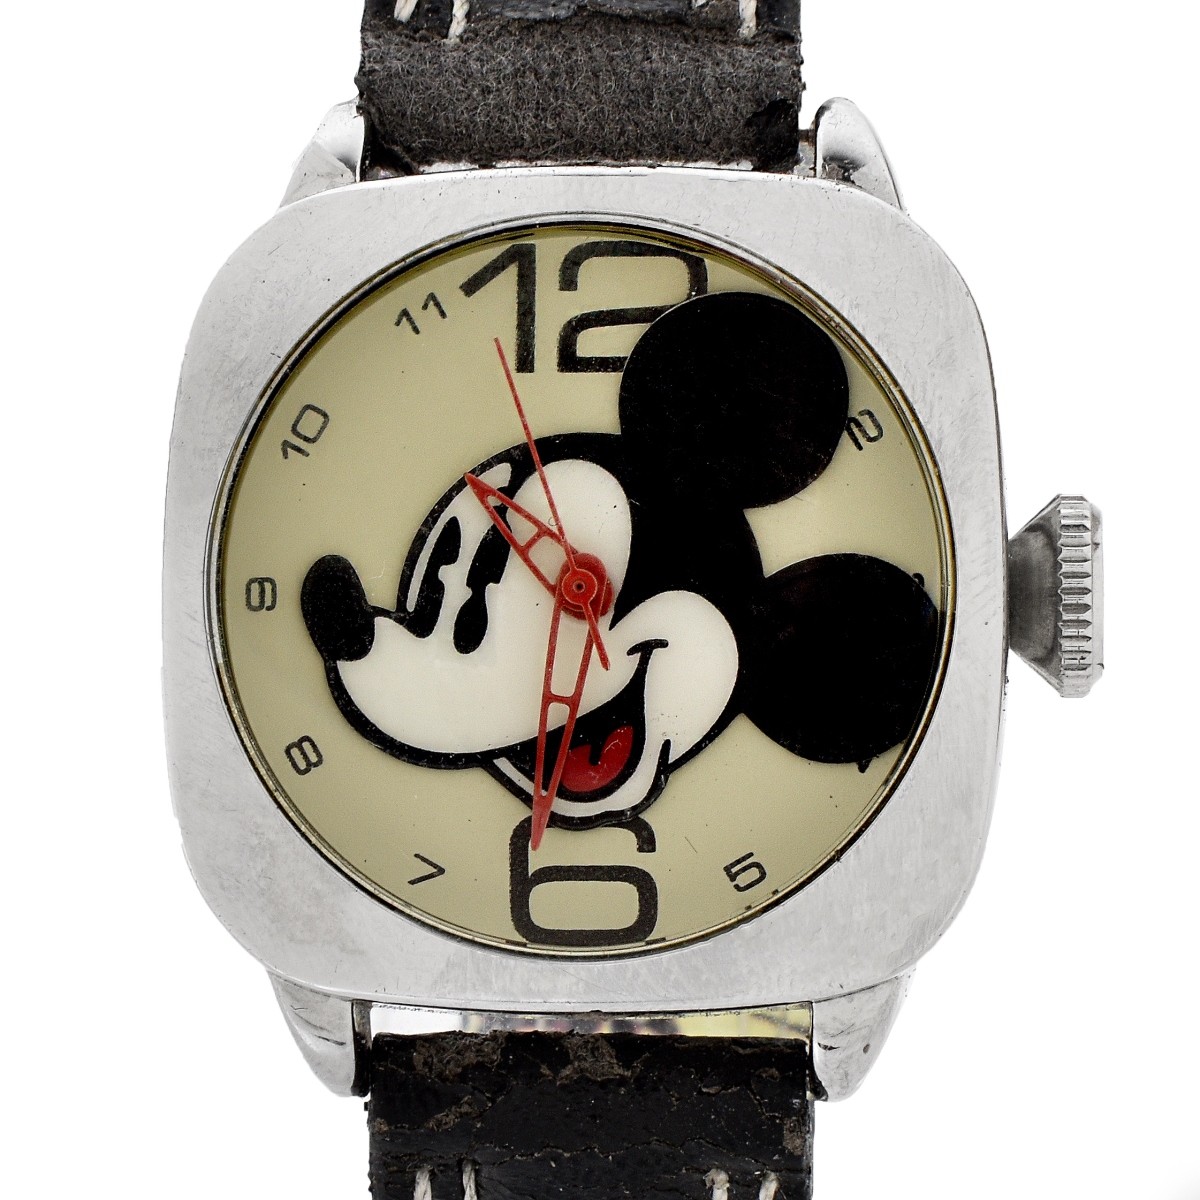 Vintage Disney Mickey Mouse Watch